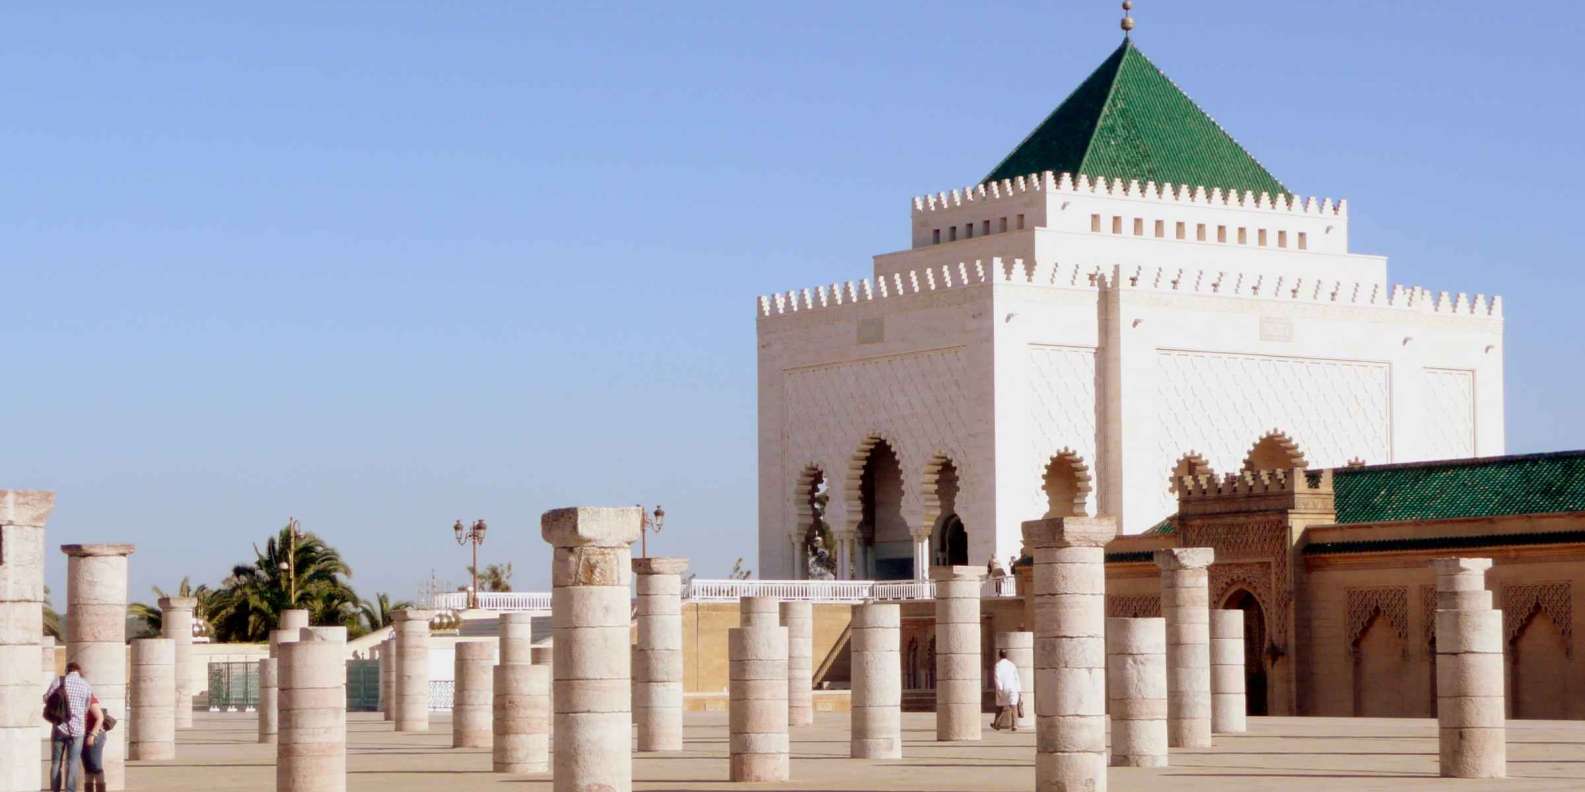 Exterior view of the iconic Mohammed V Mausoleum, a historic architectural marvel showcasing intricate design and cultural significance in Rabat, Morocco.